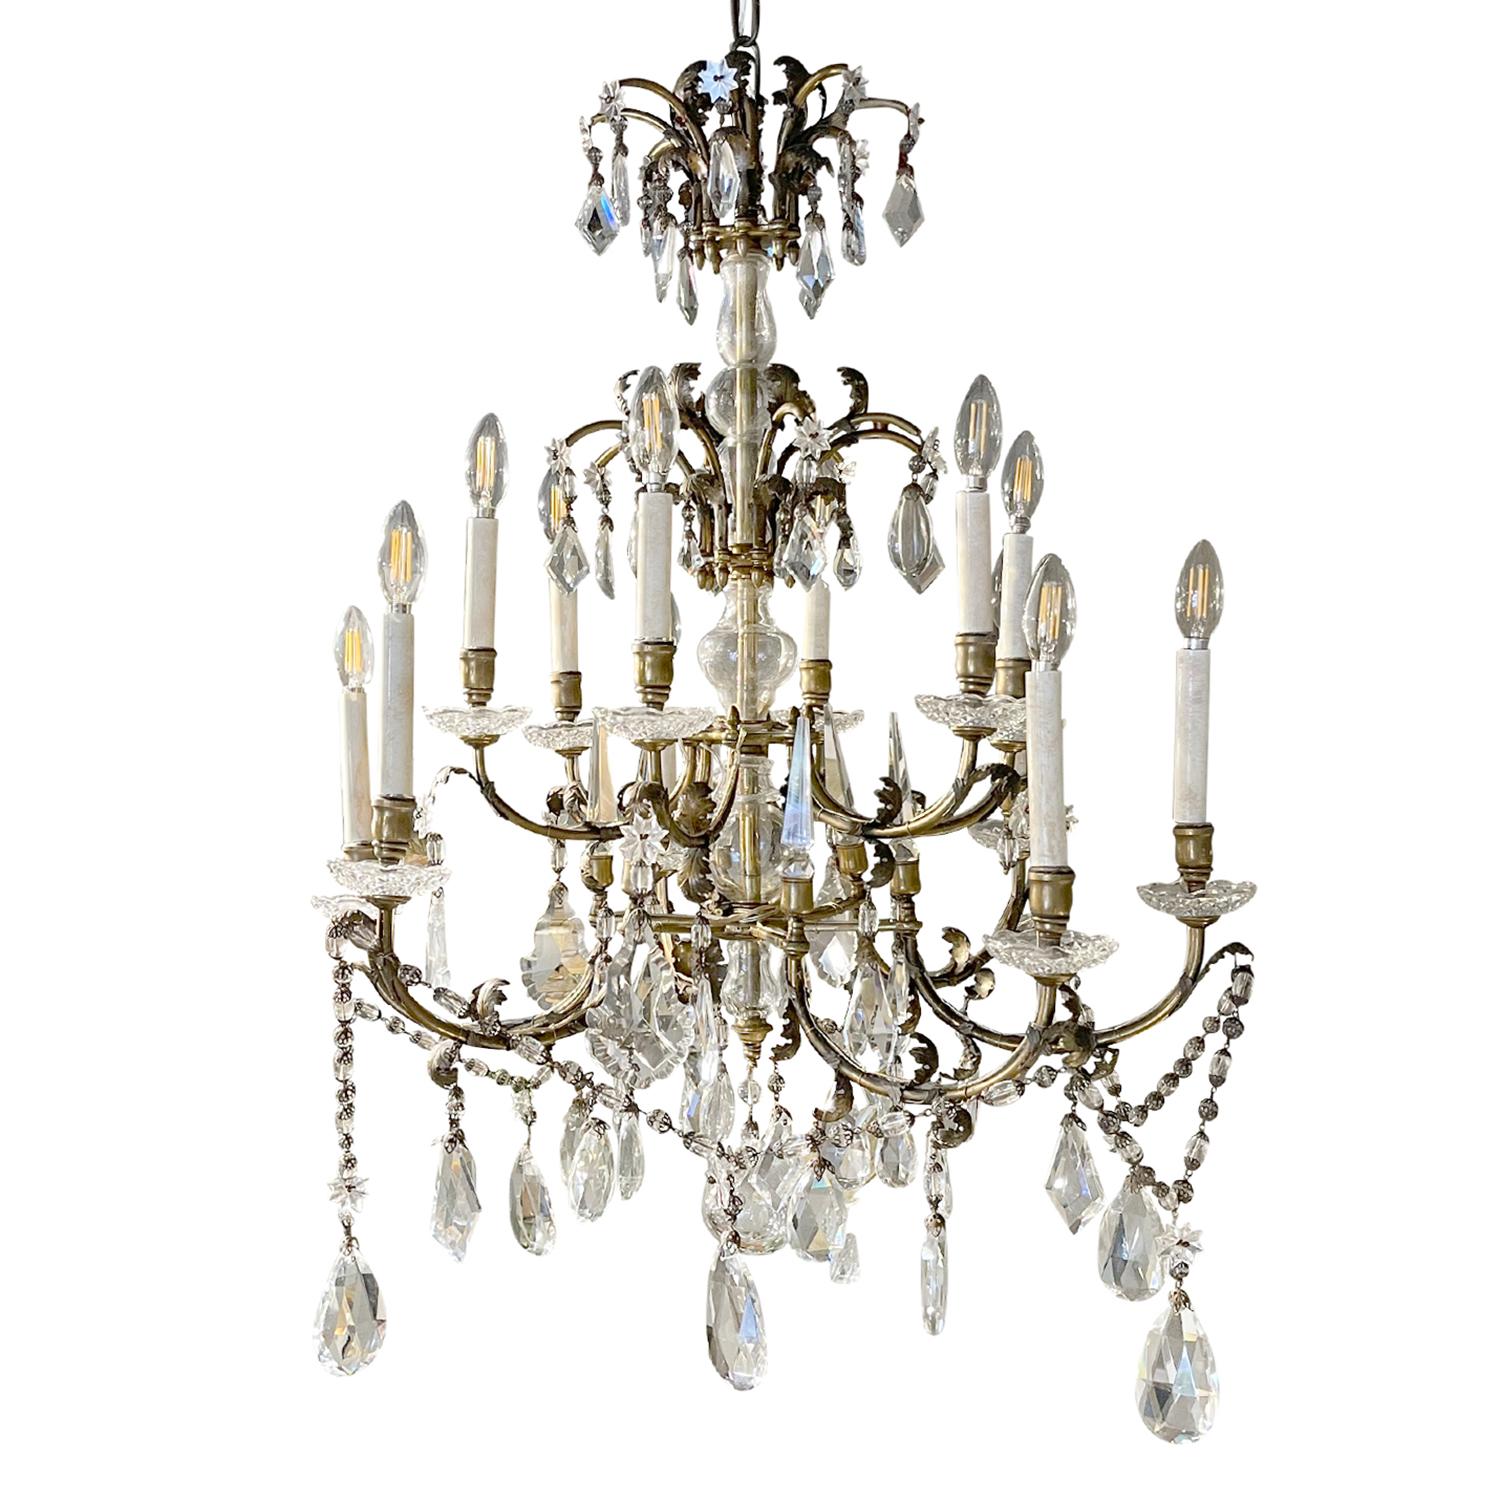 A vintage Art Deco French four tiered chandelier made of handcrafted metal and brass, in good condition. The frame of the teardrop ceiling light is made of bronze, composed with twelve scrolled arms, each of them is featuring a white waxed candle